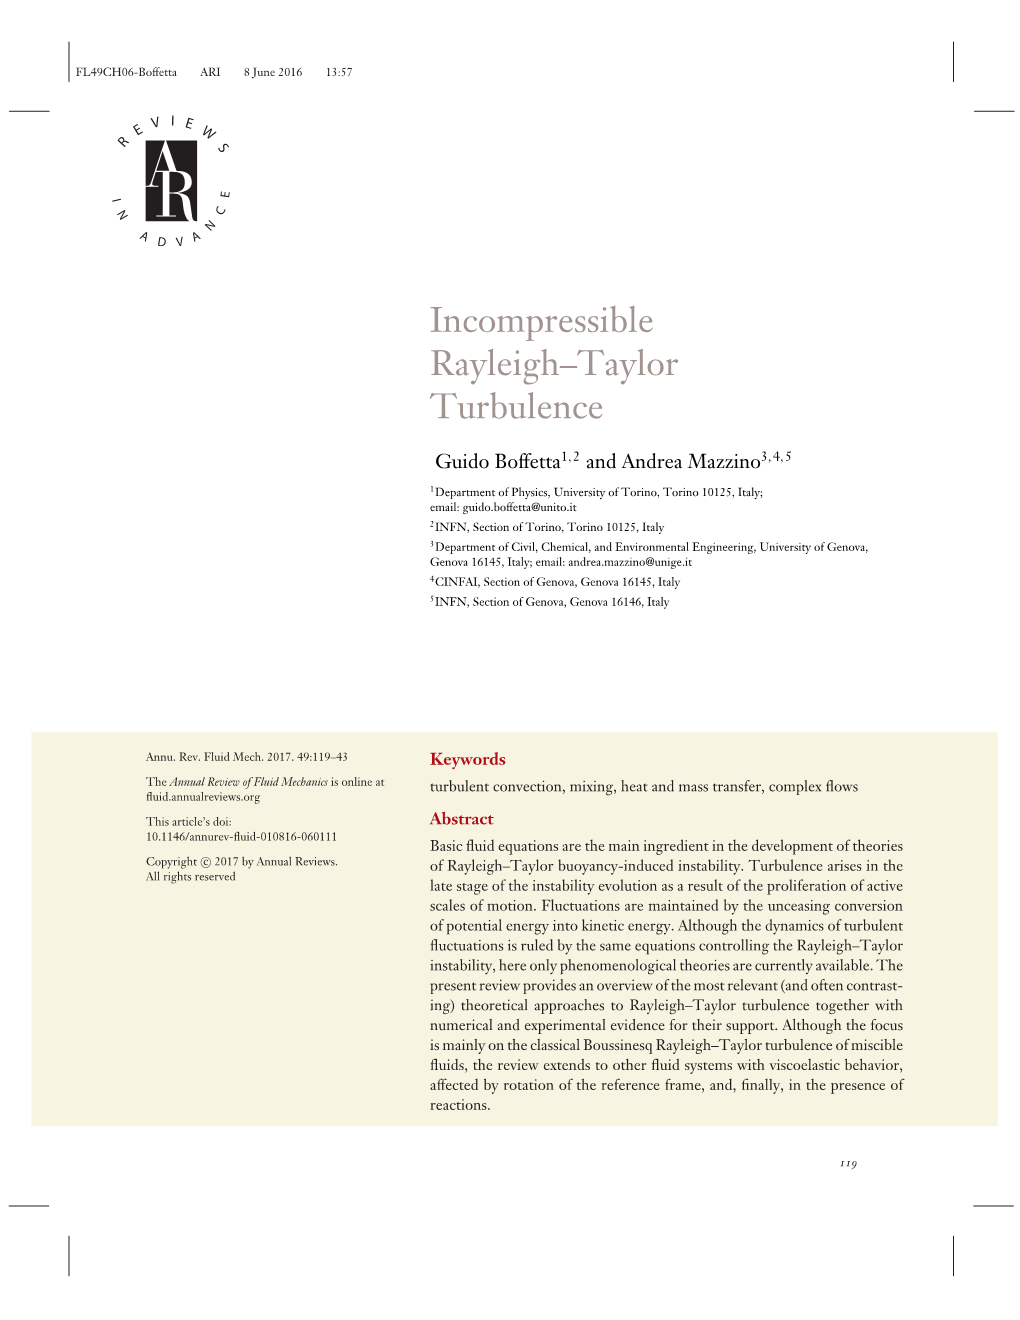 Incompressible Rayleigh–Taylor Turbulence